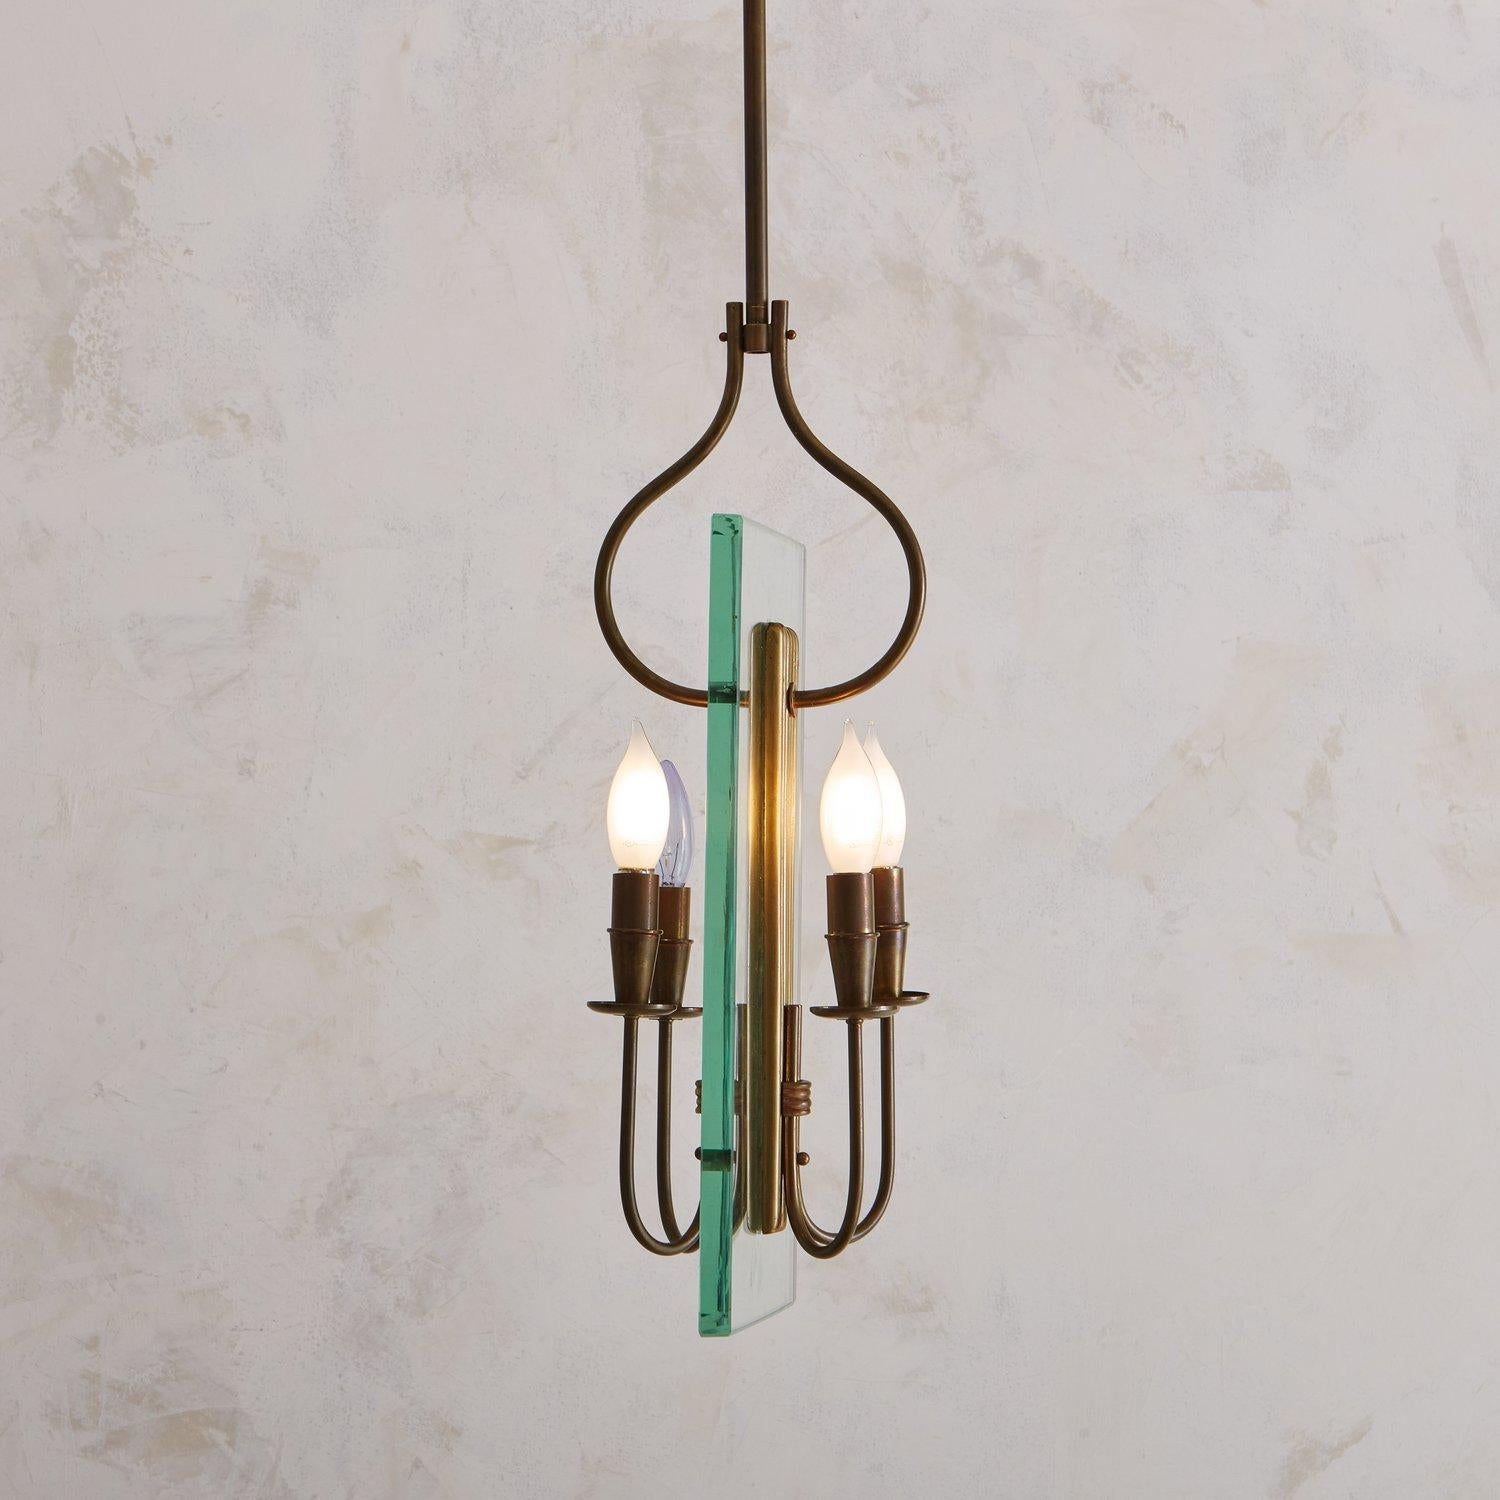 Brass + Glass Pendant Light in the Style of Fontana Arte, 20th Century For Sale 3